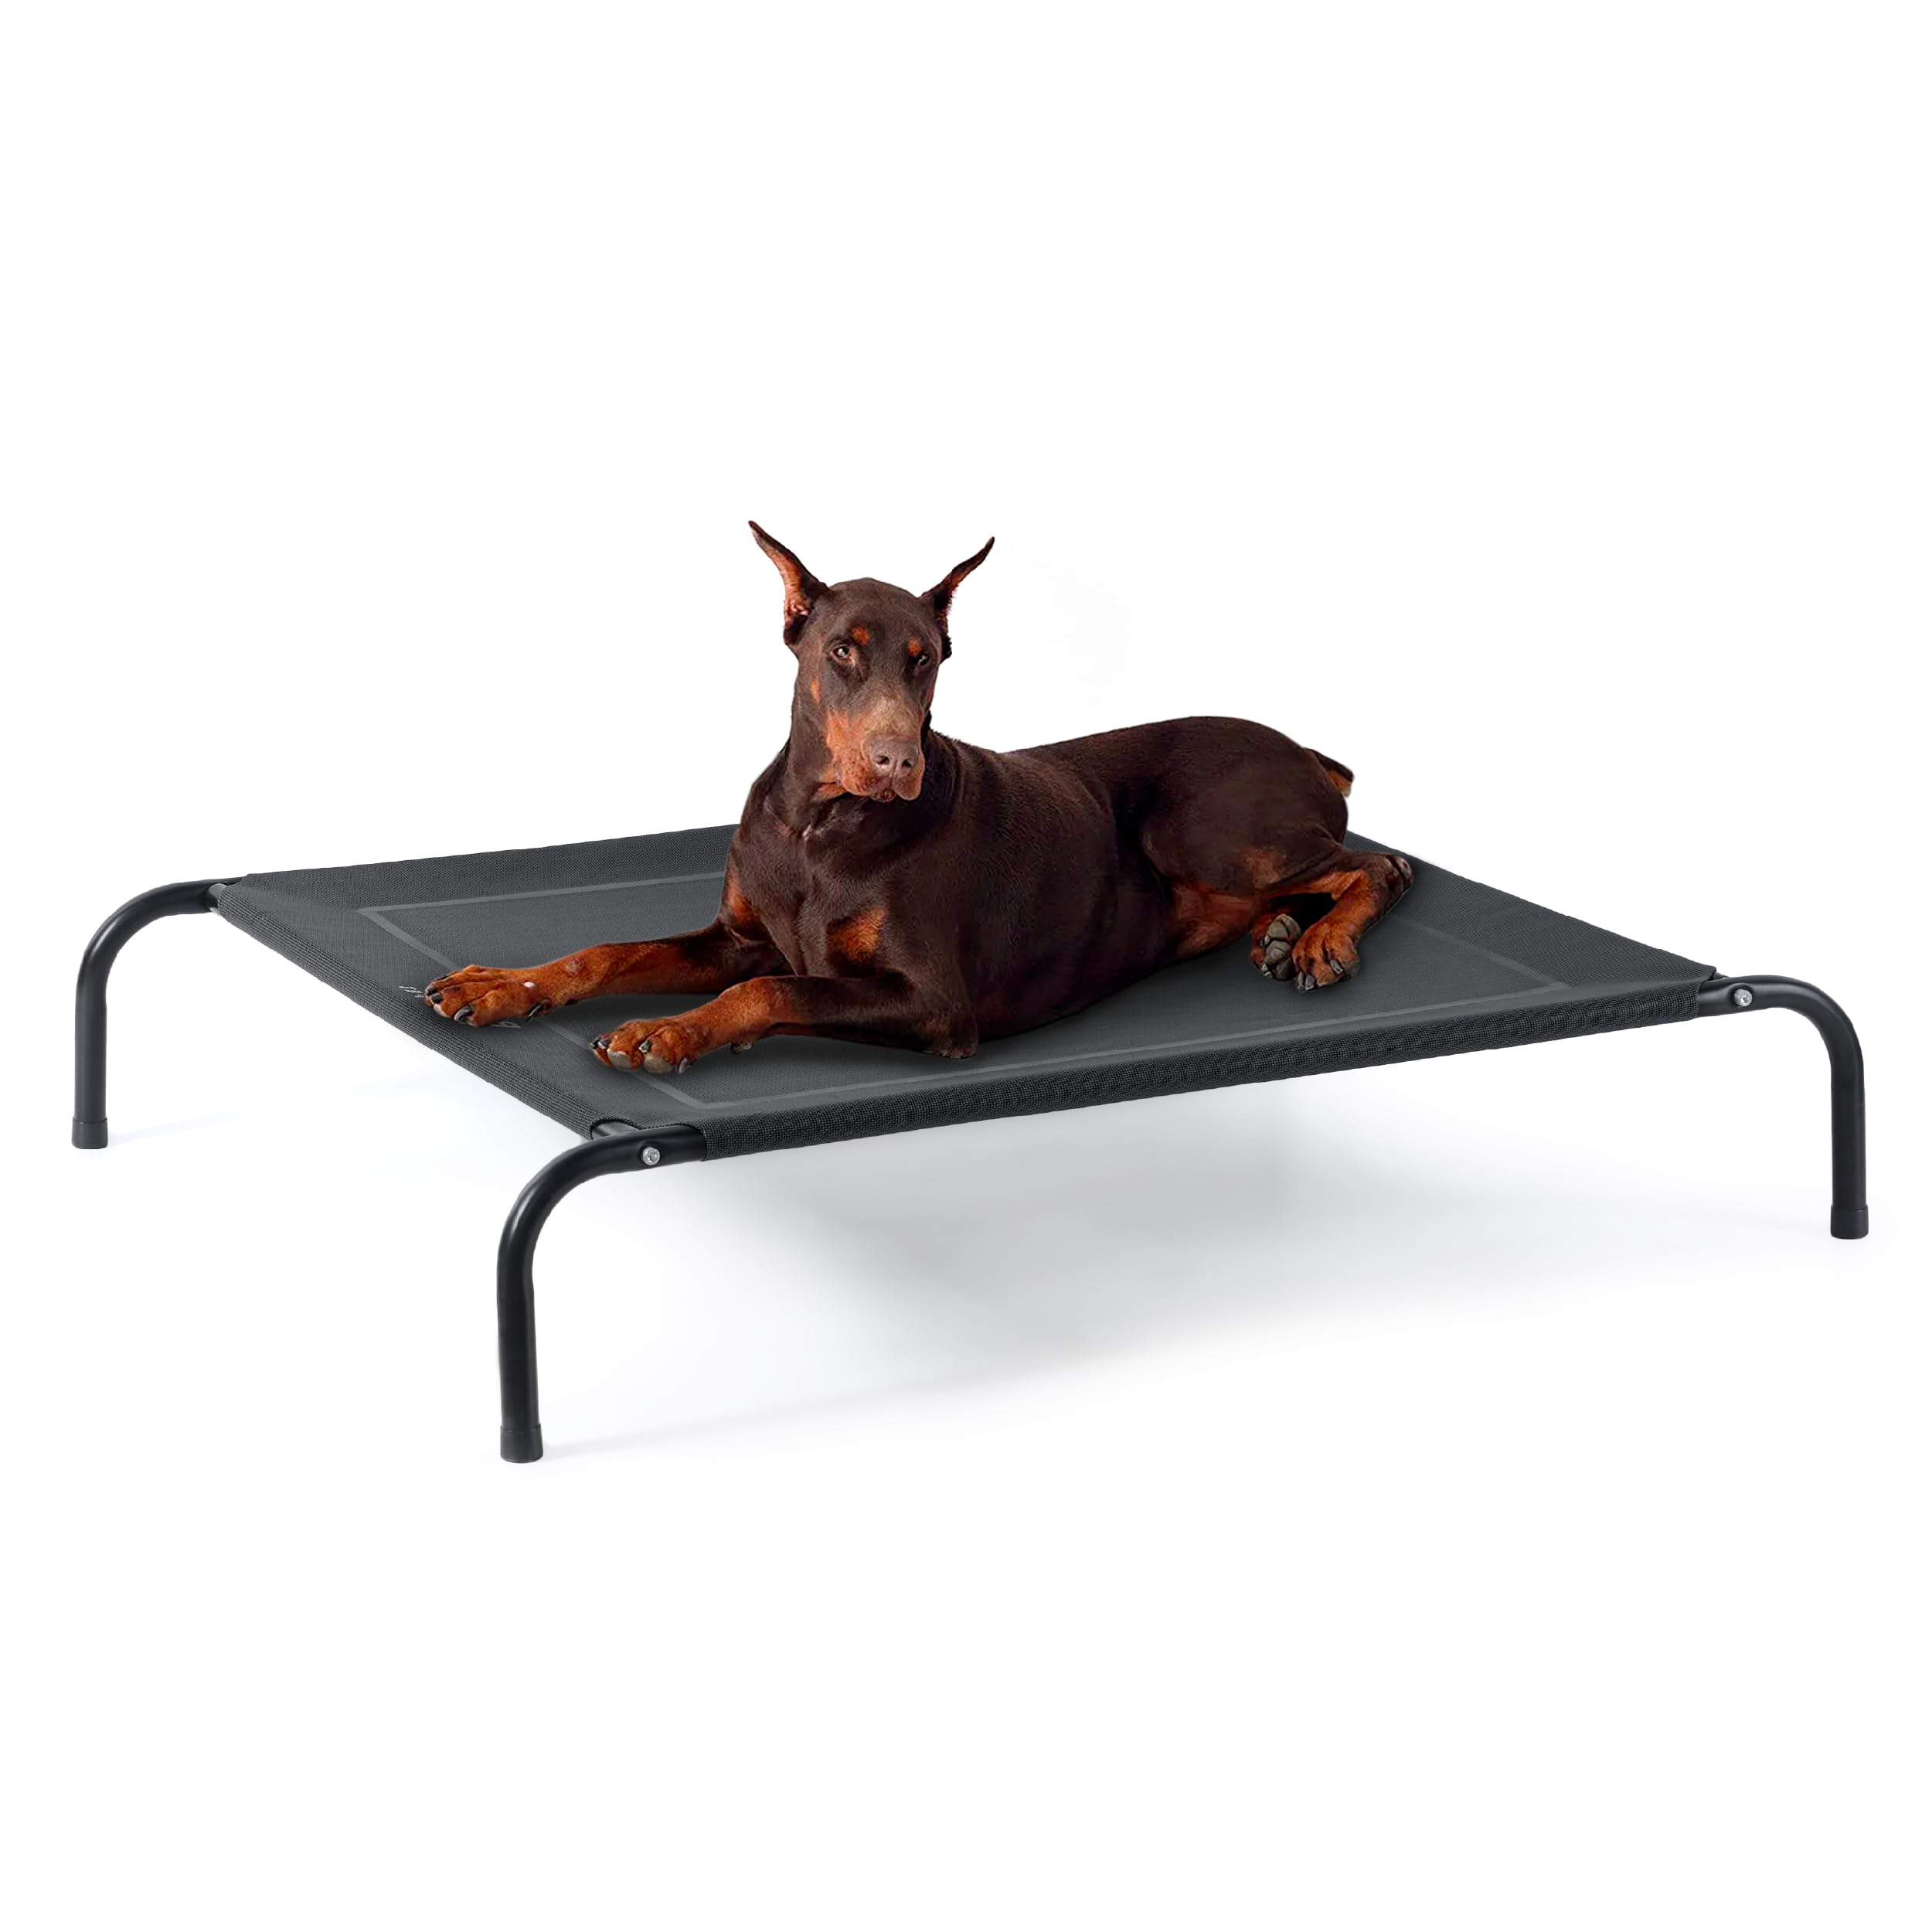 Bedsure XL Elevated Outdoor Dog Bed - Raised Dog Cots Beds for Extra Large Dogs, Portable Indoor & Outdoor Pet Hammock Bed with 